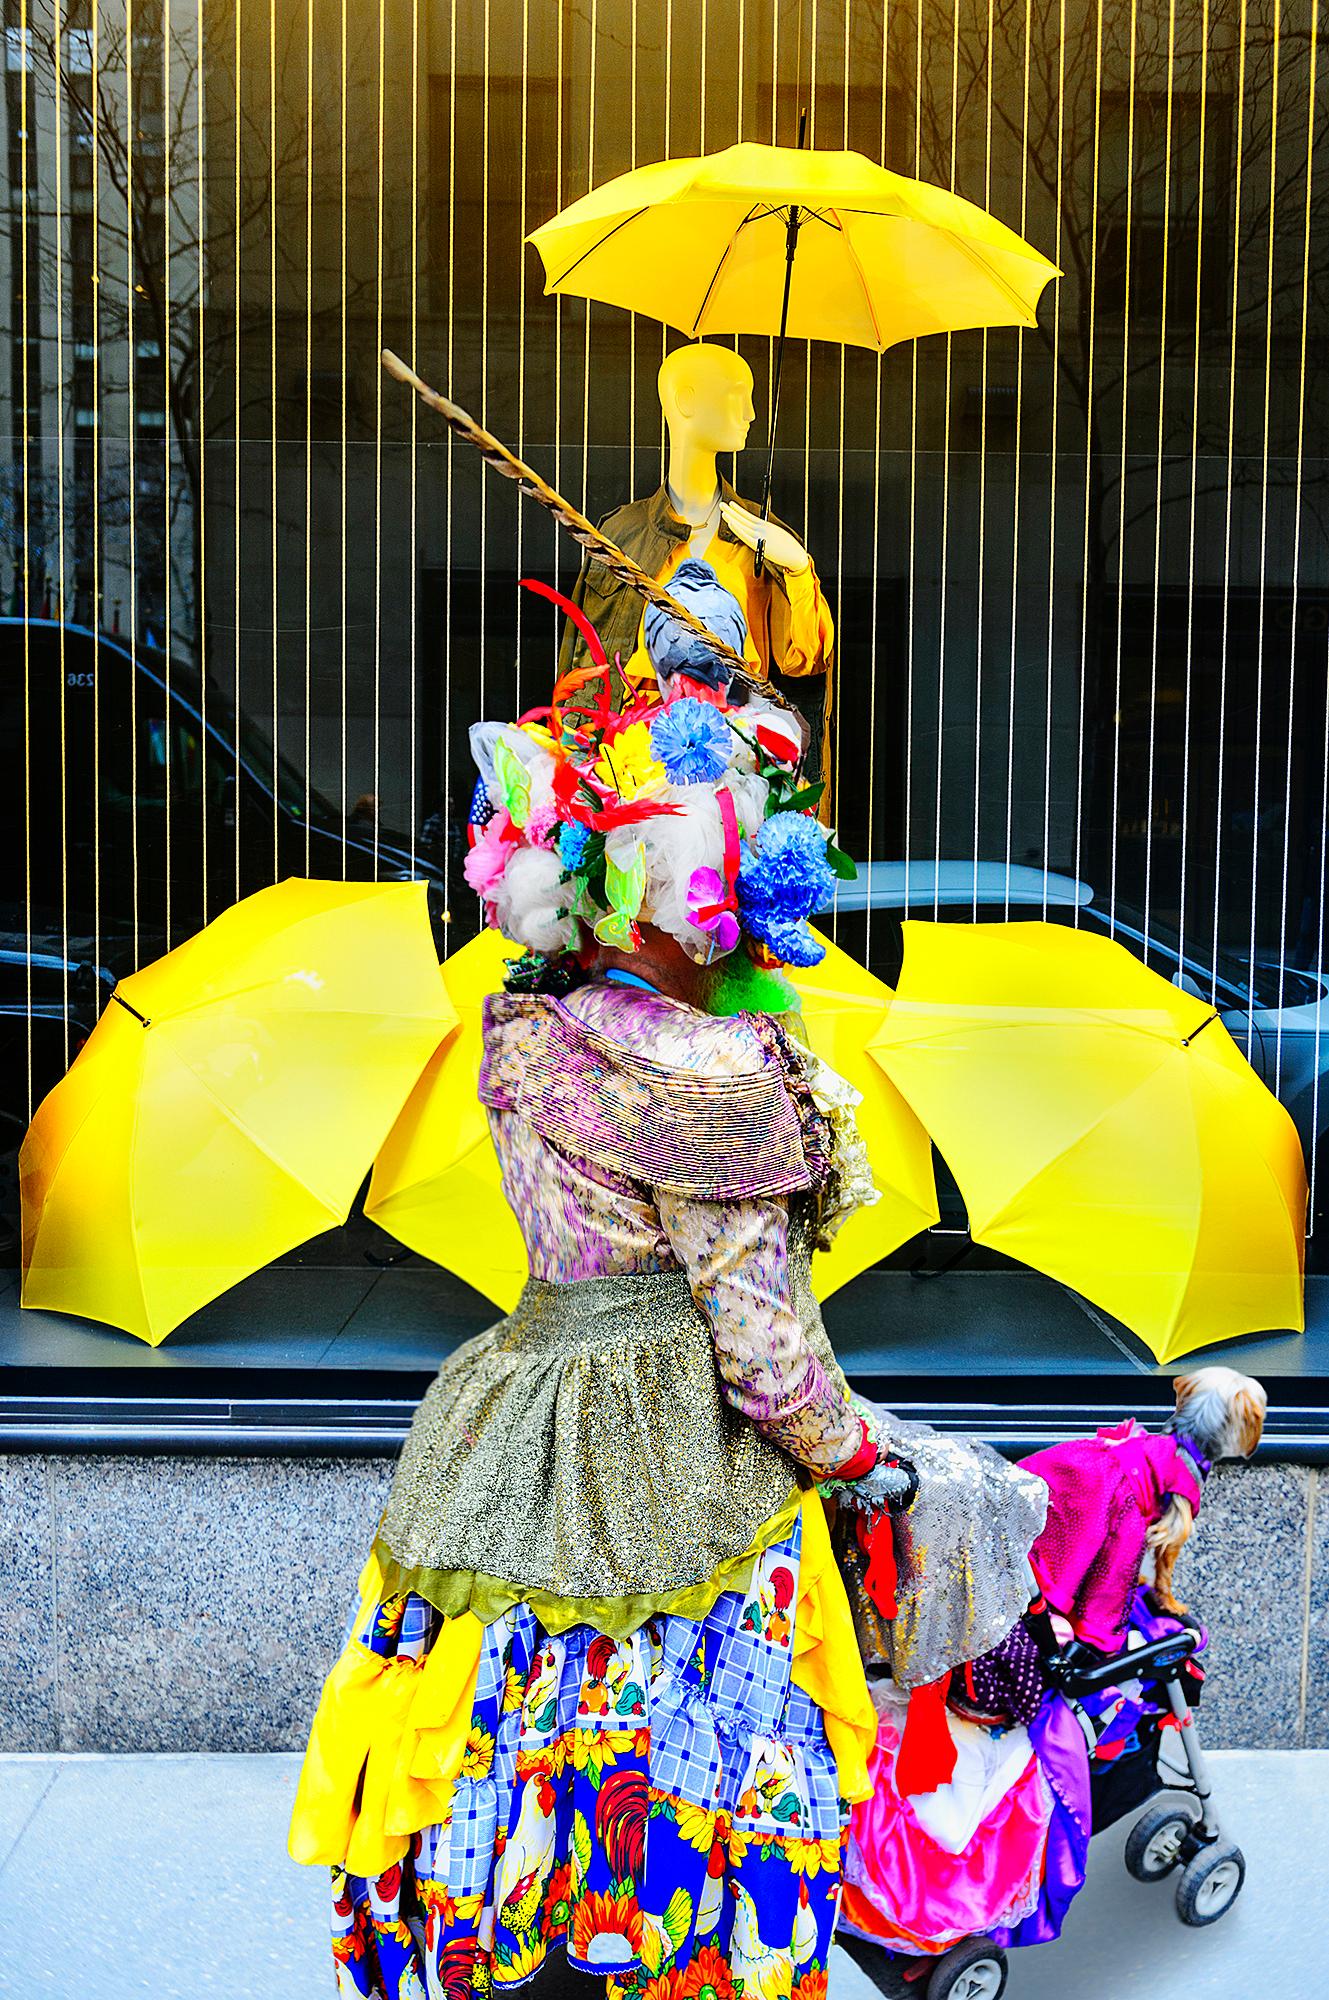 Mitchell Funk Portrait Photograph - Street Photography of  Eccentric Women with Colorful Cloths and Yellow Umbrellas